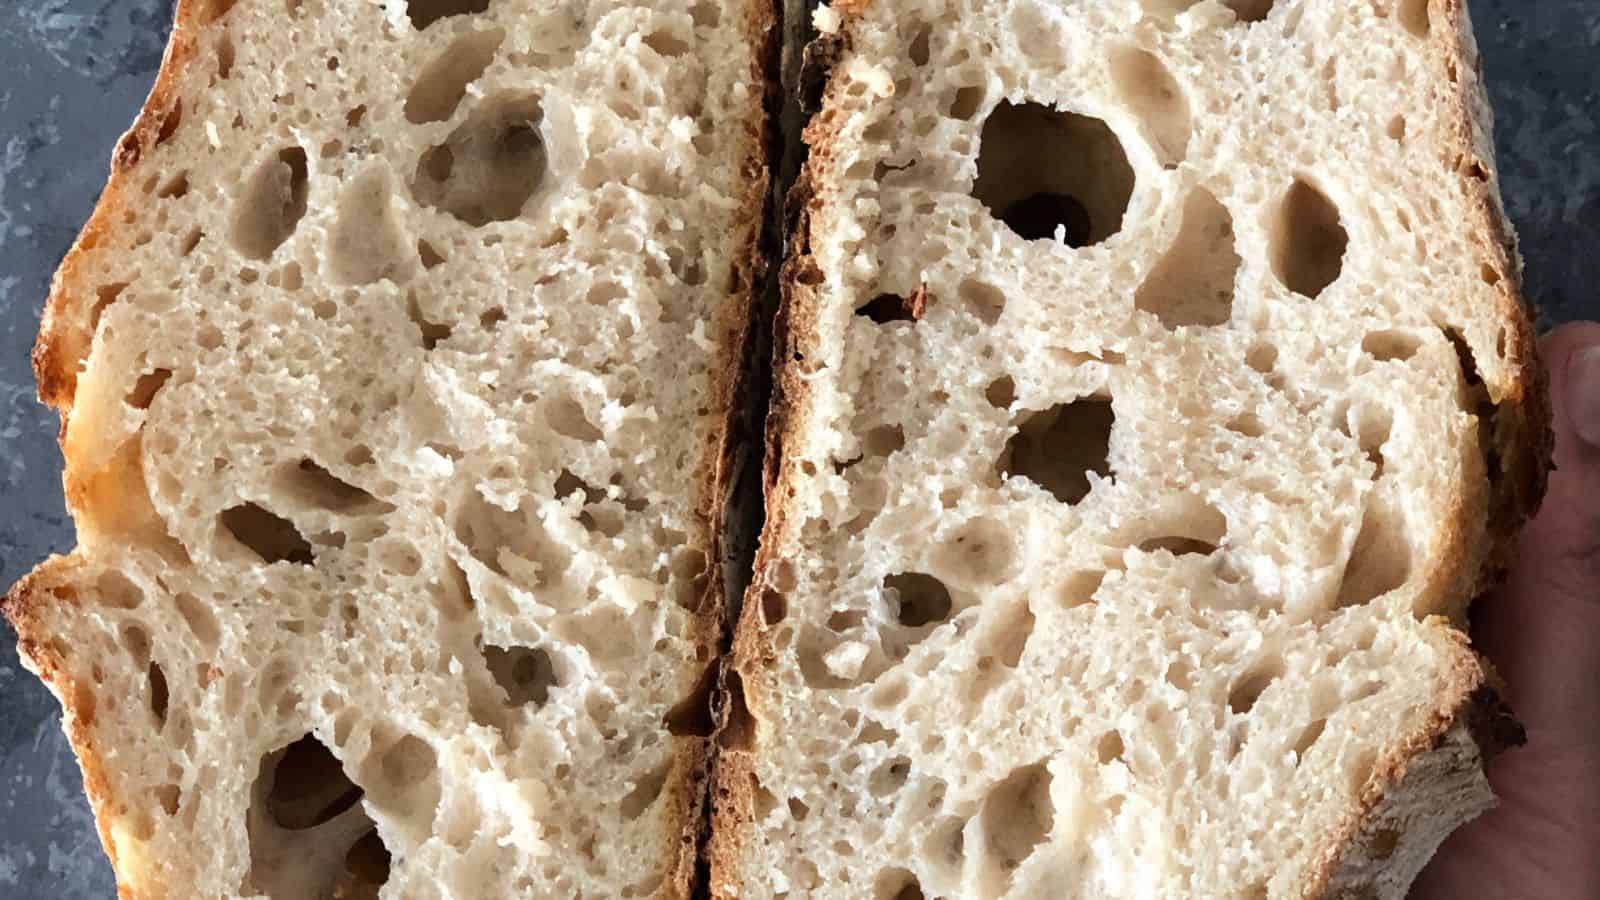 Close-up of a sliced loaf of bread with a coarse, airy texture and golden-brown crust.